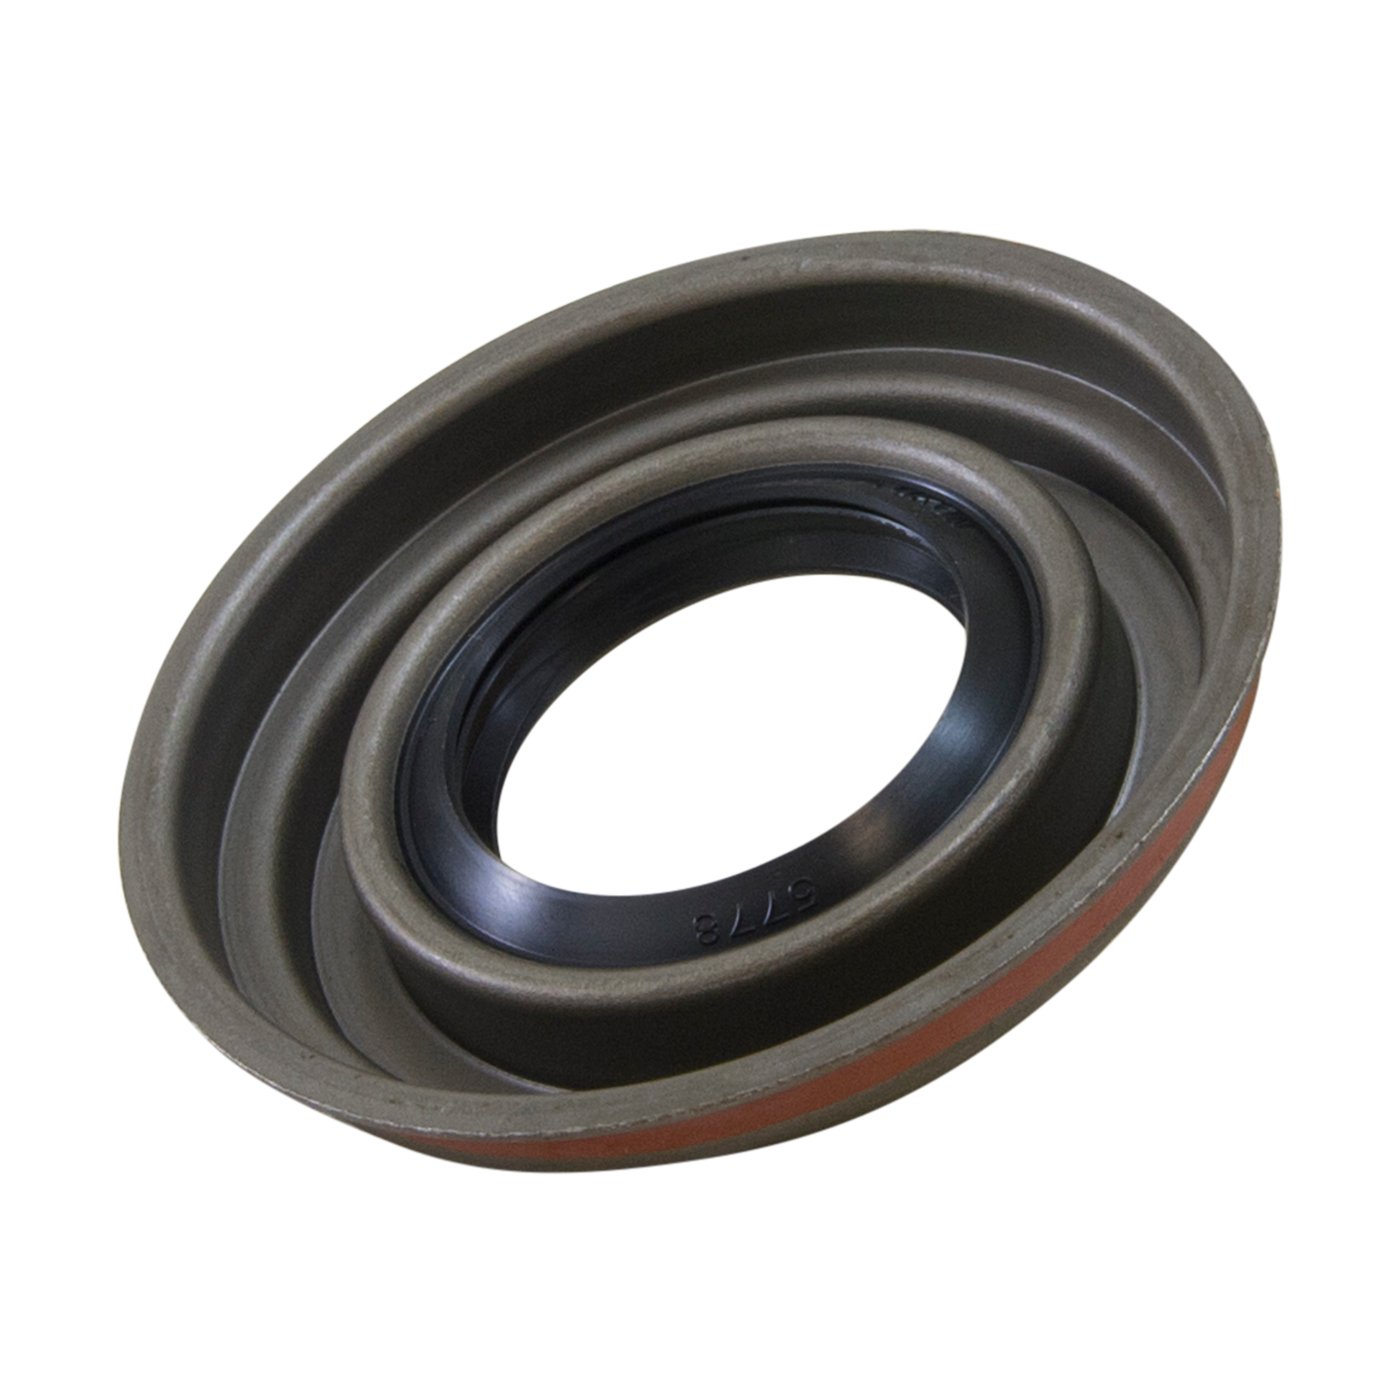 Replacement Pinion Seal For '01 And Newer Dana 30, 44, And TJ